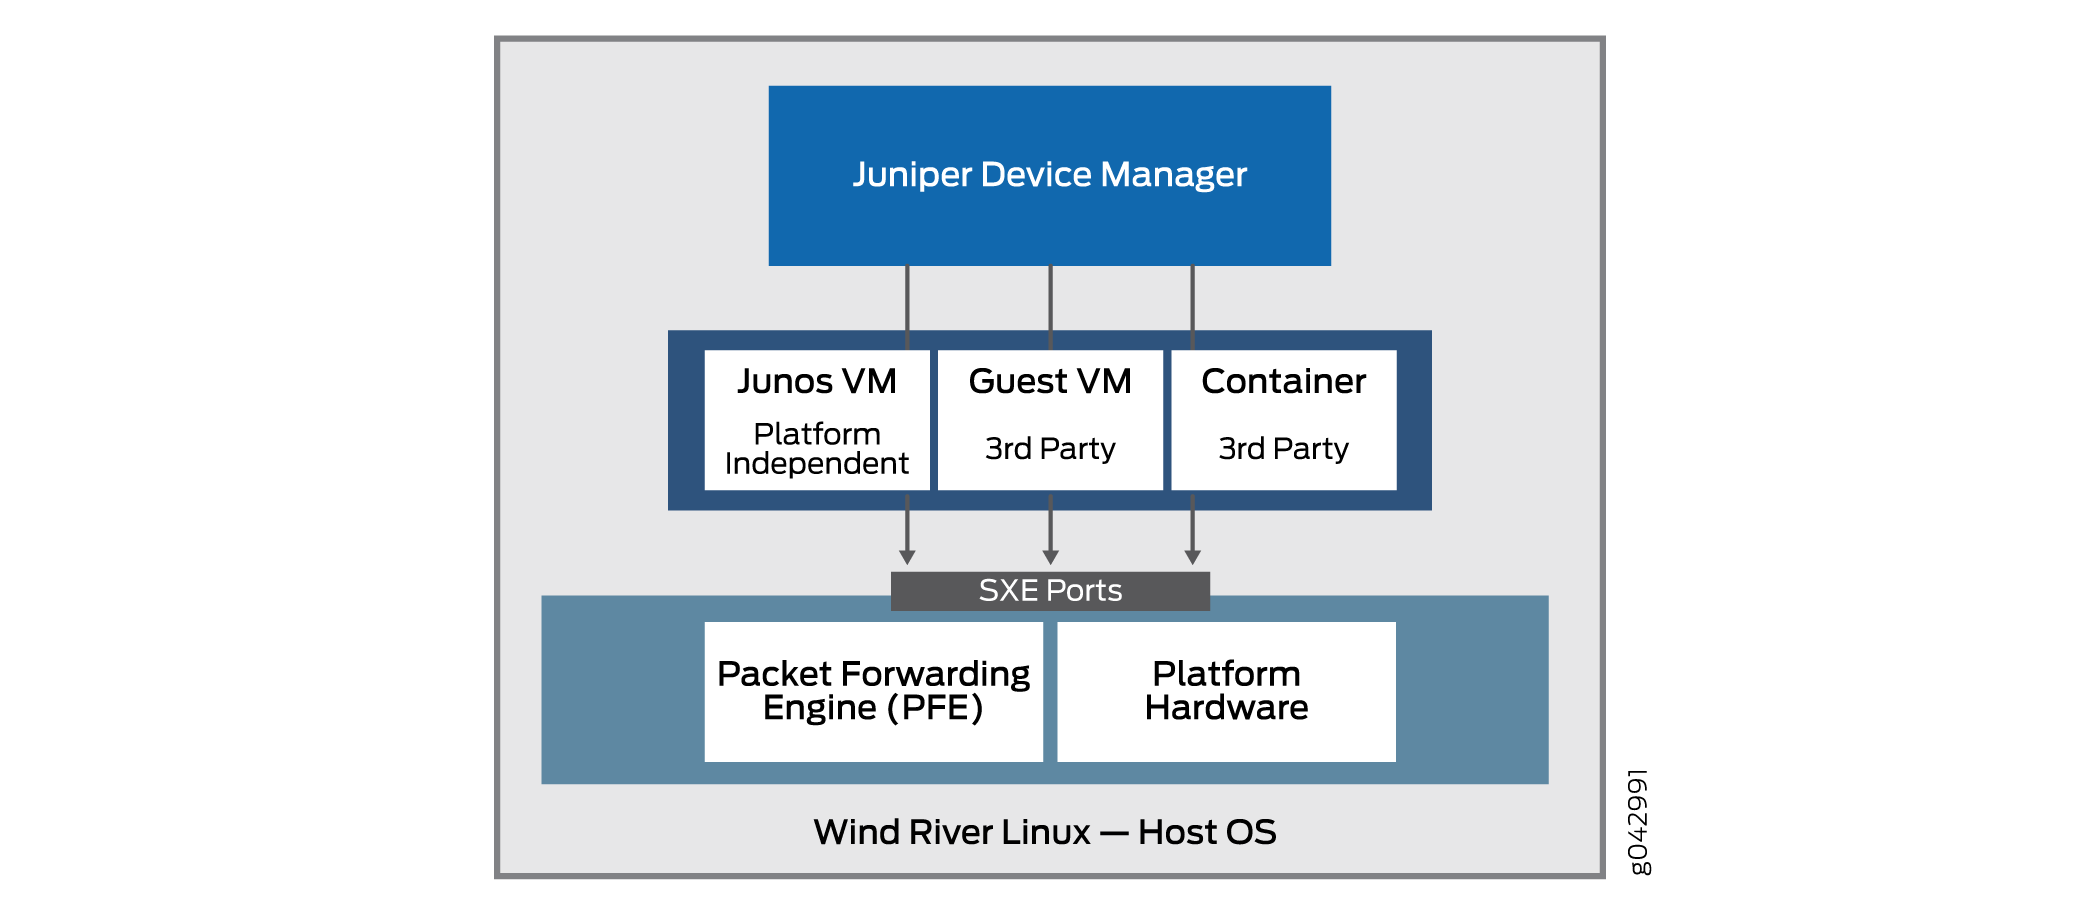 Position of the Juniper Device Manager